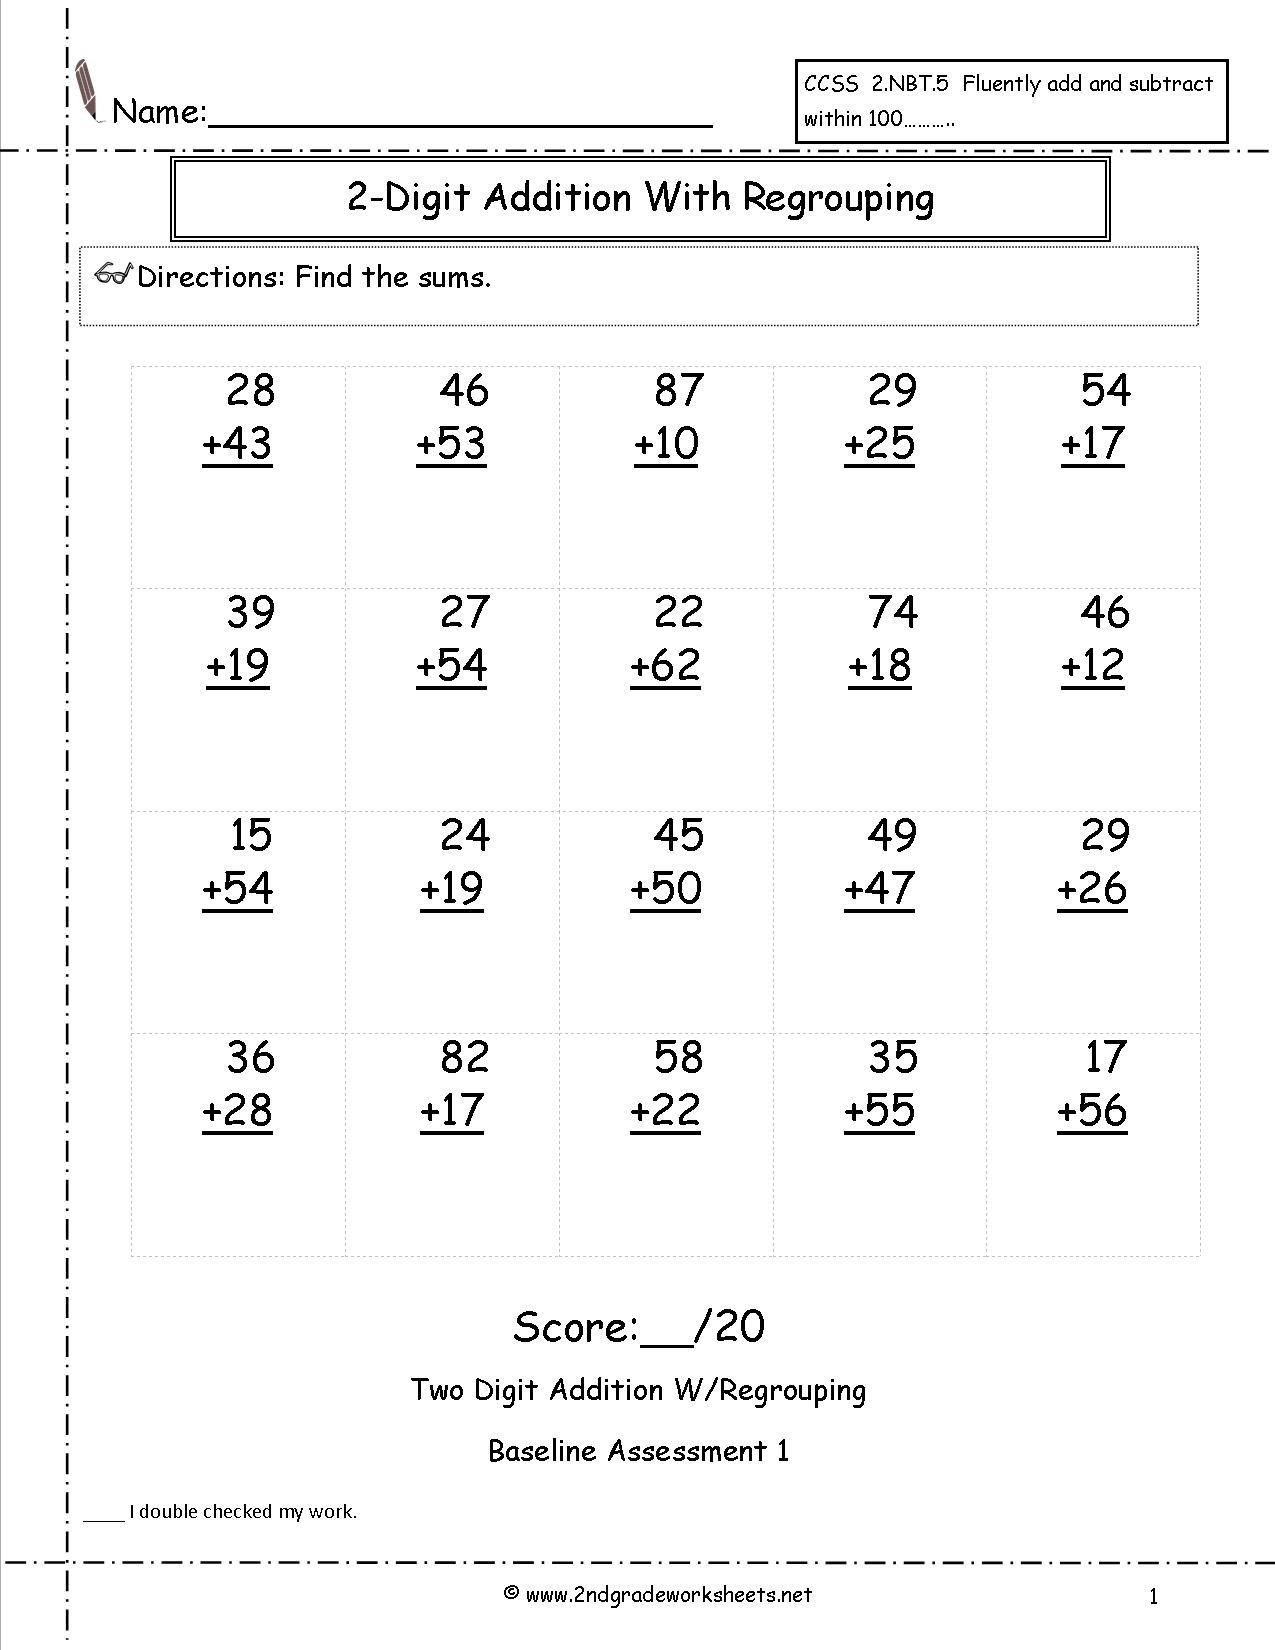 Two Digit Addition With Regrouping Assessment | Love To Learn - Free Printable Two Digit Addition Worksheets